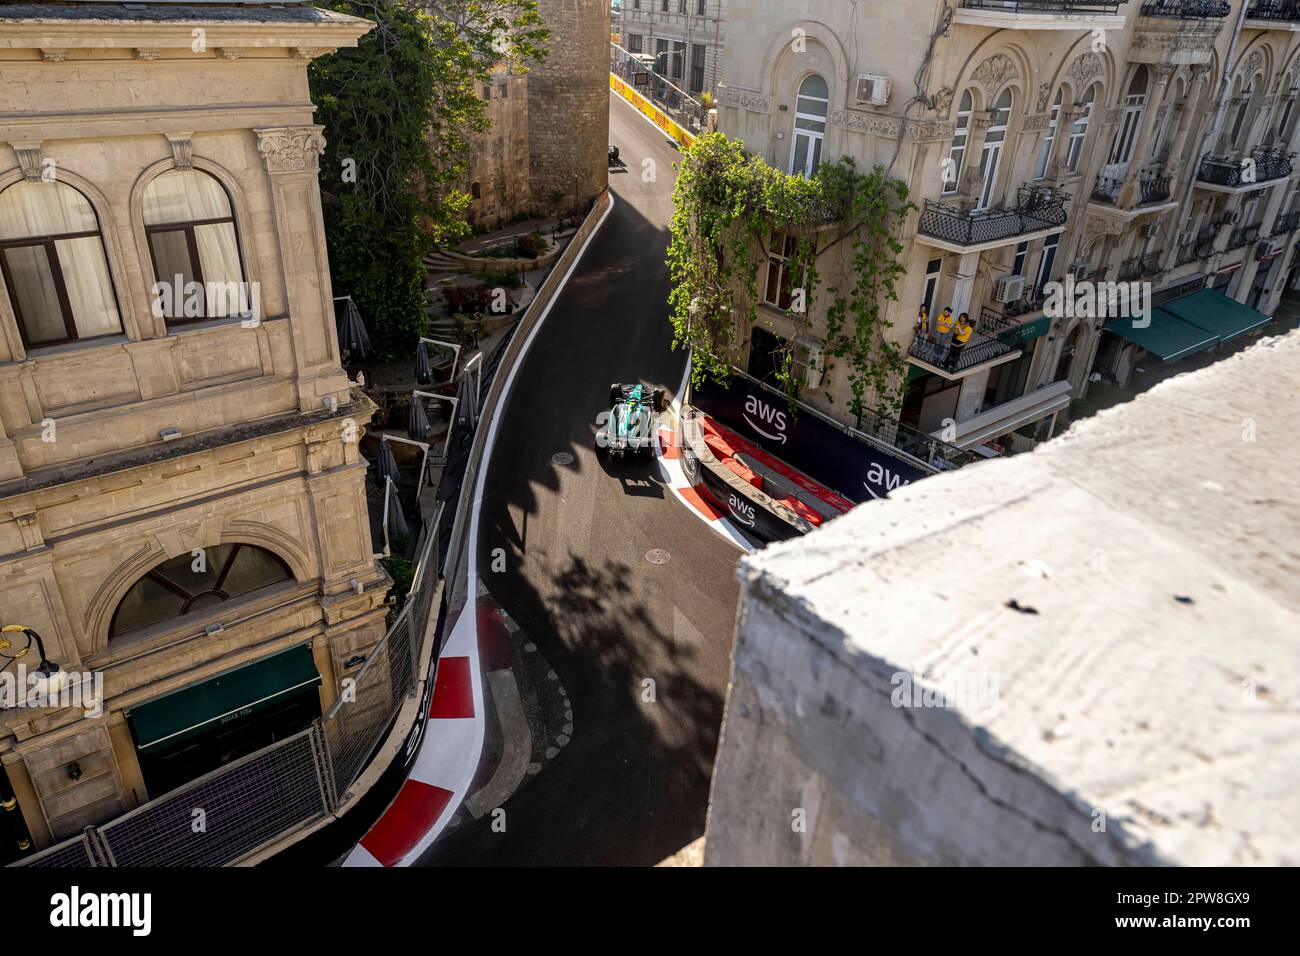 Baku, Azerbaijan, April 28, Lance Stroll, from Canada competes for Aston Martin F1. Qualifying, round 4 of the 2023 Formula 1 championship. Credit: Michael Potts/Alamy Live News Stock Photo